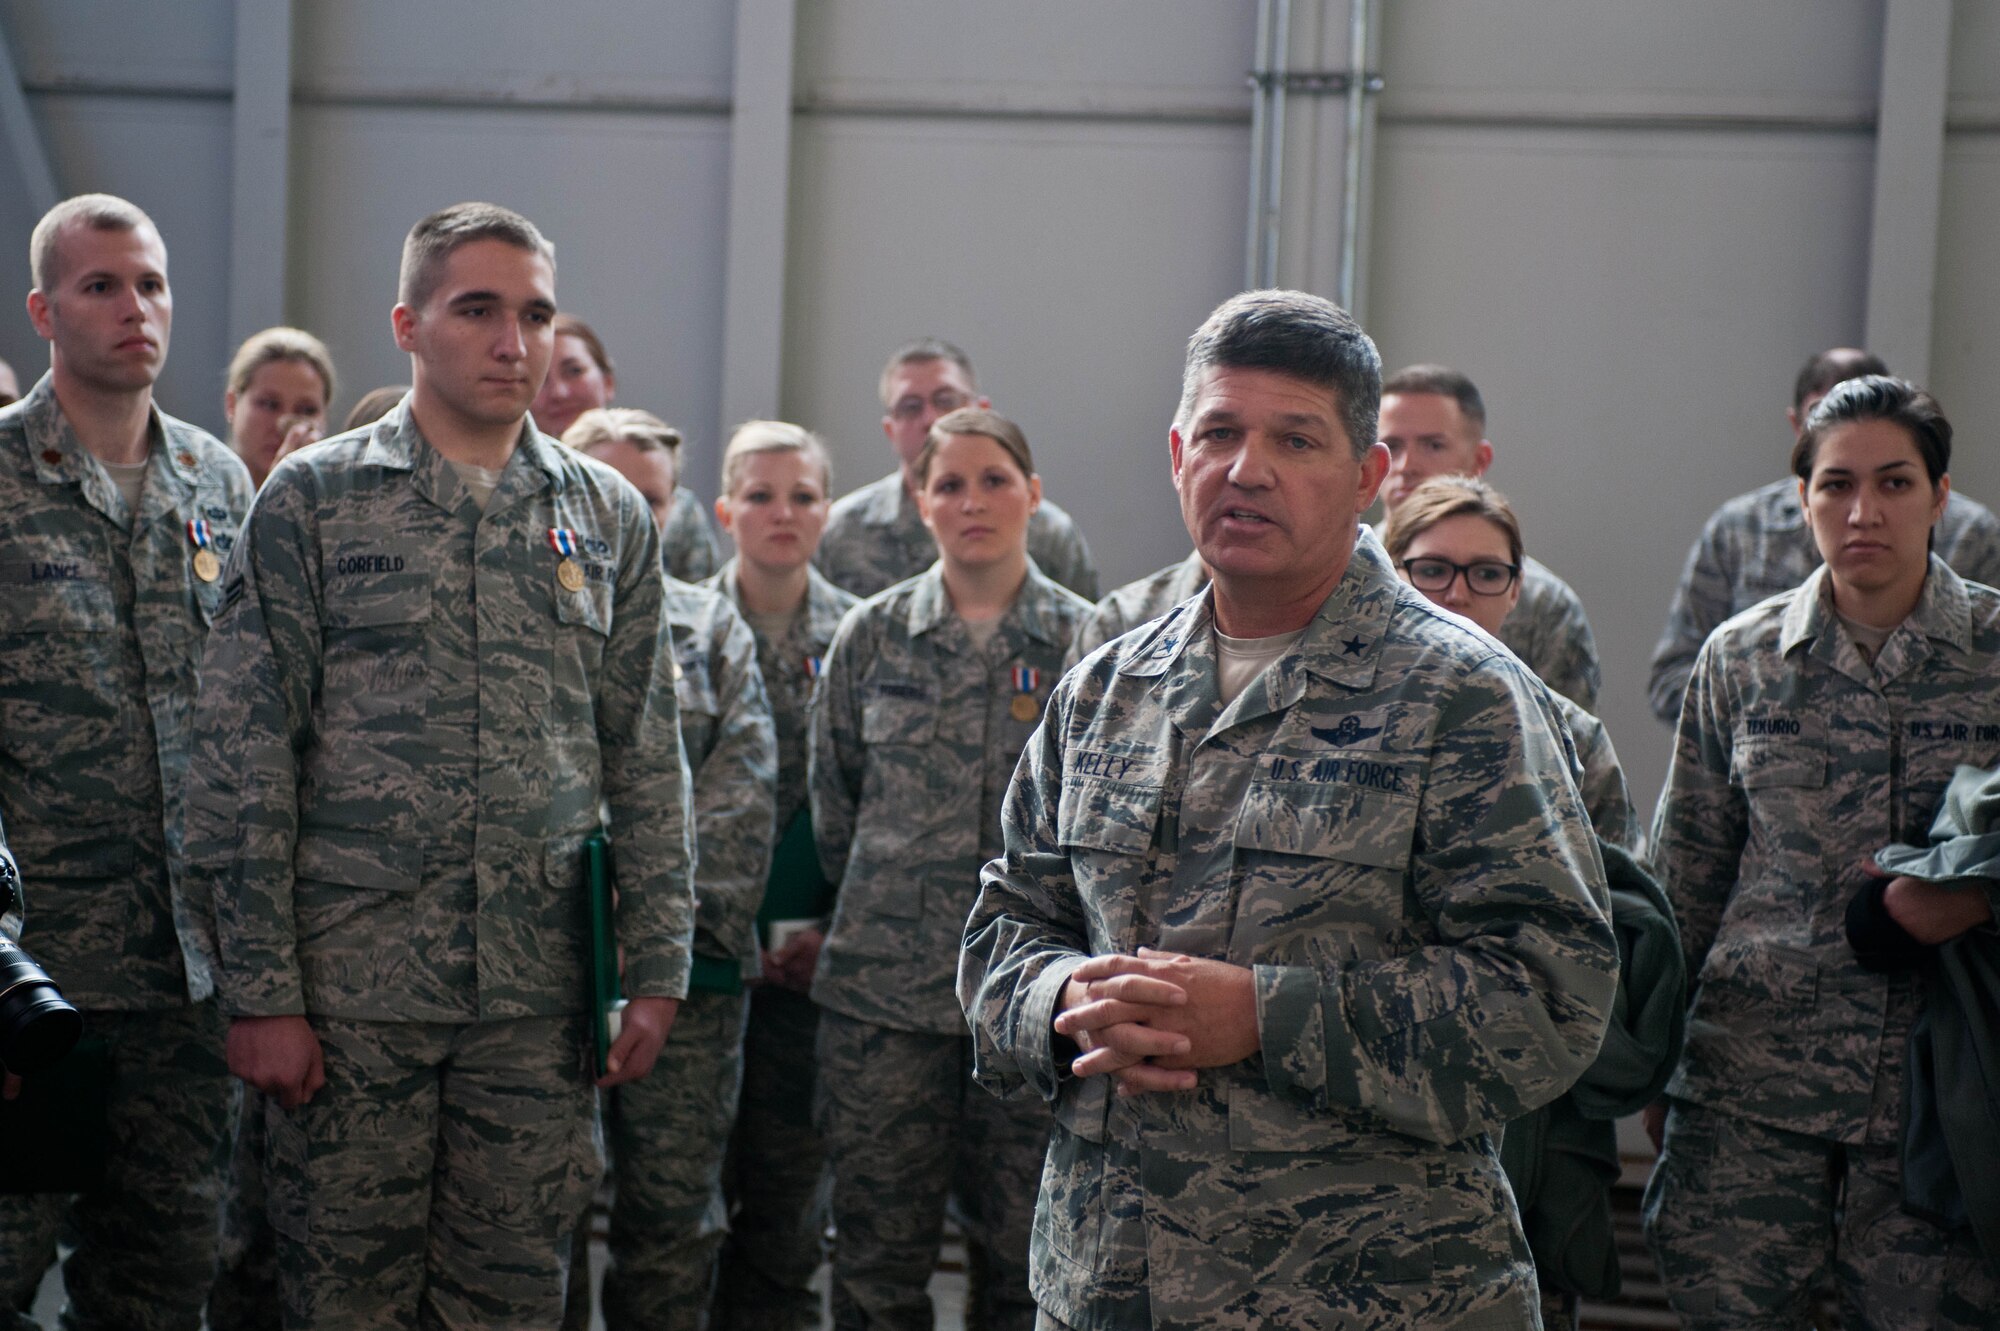 Brig. Gen. Todd Kelly, North Carolina National Guard assistant adjutant general-air, congratulates Airmen at Ellsworth Air Force Base, S.D., Nov. 28, 2012 for their excellence and professionalism during the C-130 crash response that occurred in southwestern South Dakota during  July 2012. Ellsworth Airmen secured the site, aided in the investigation, and preserved the wreckage. (U.S. Air Force photo by Airman 1st Class Zachary Hada/Released)